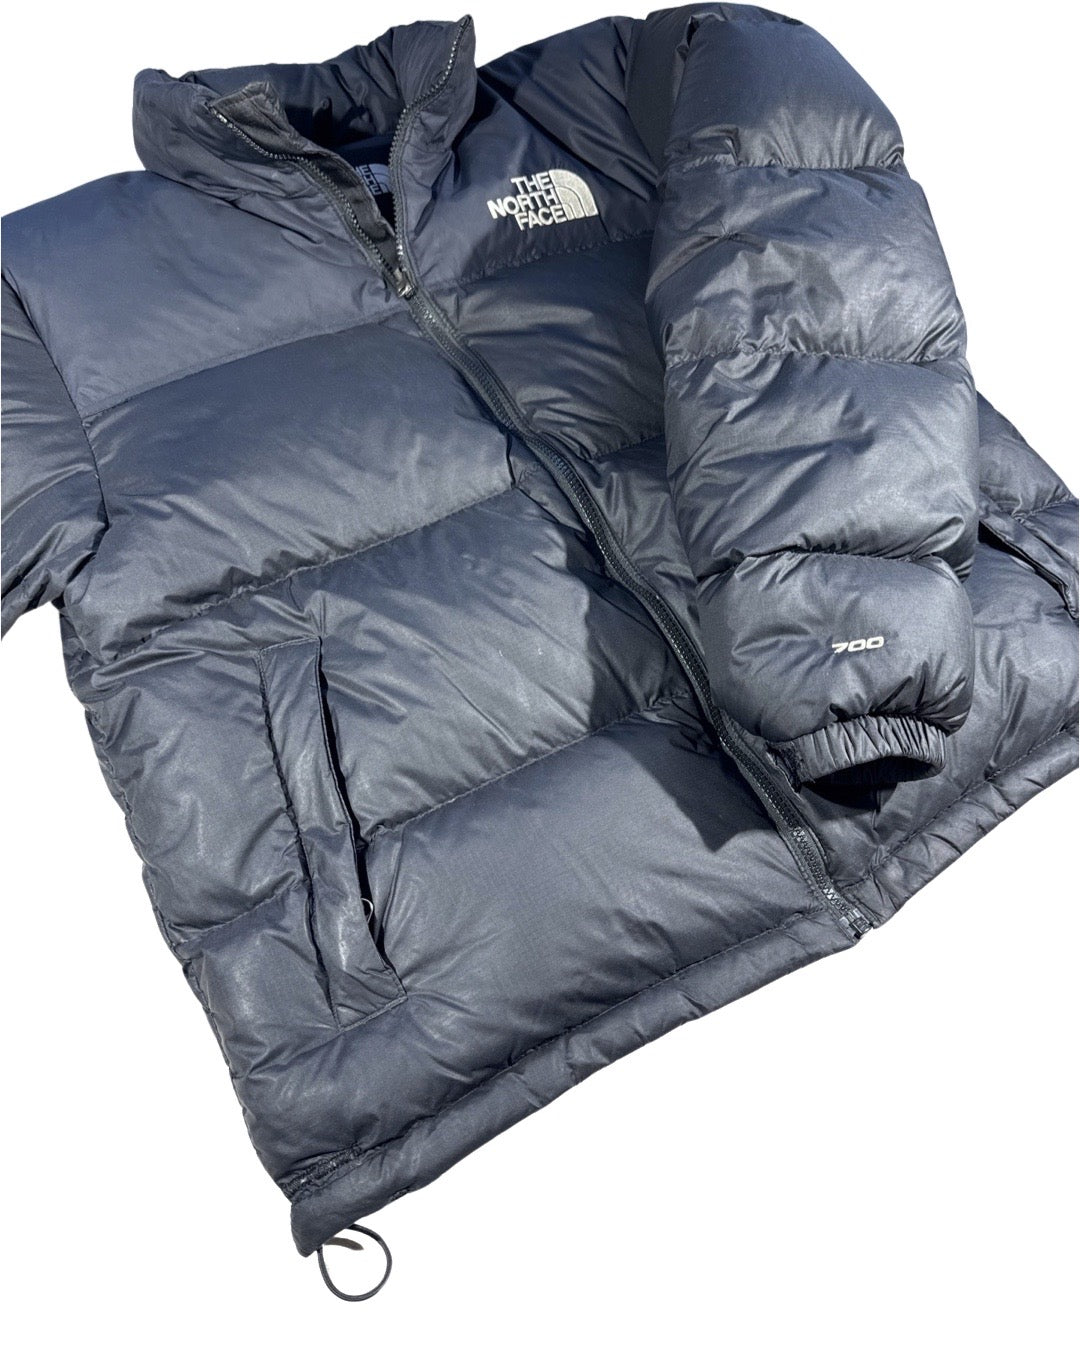 The North Face Nuptse Puffer - L